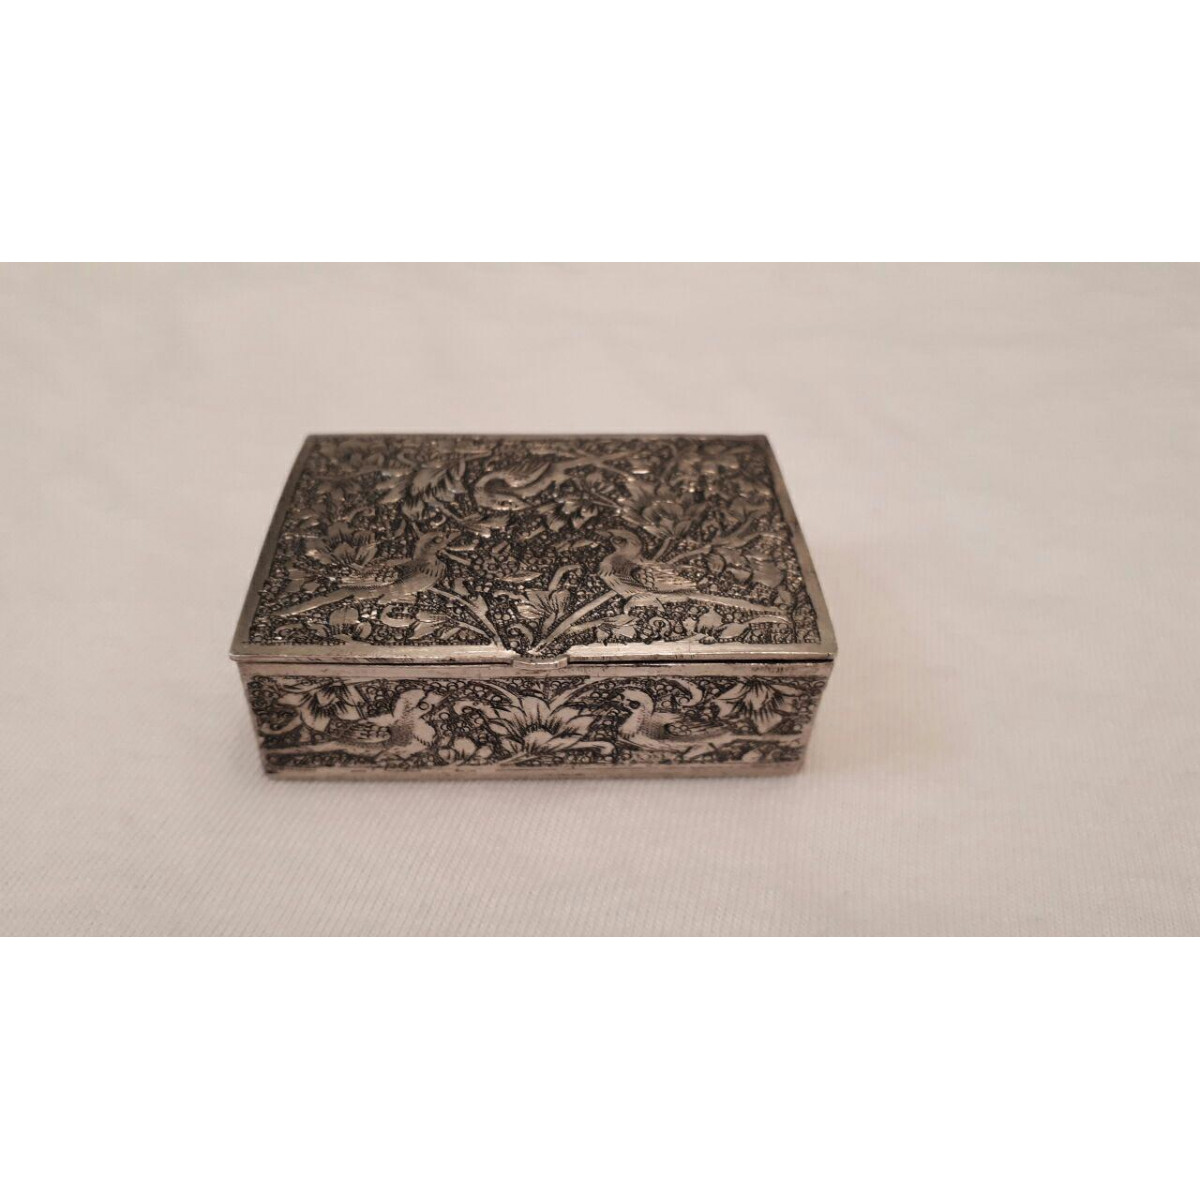 Hand Engraved Silver Jewelry Box - HS1000-Persian Handicrafts